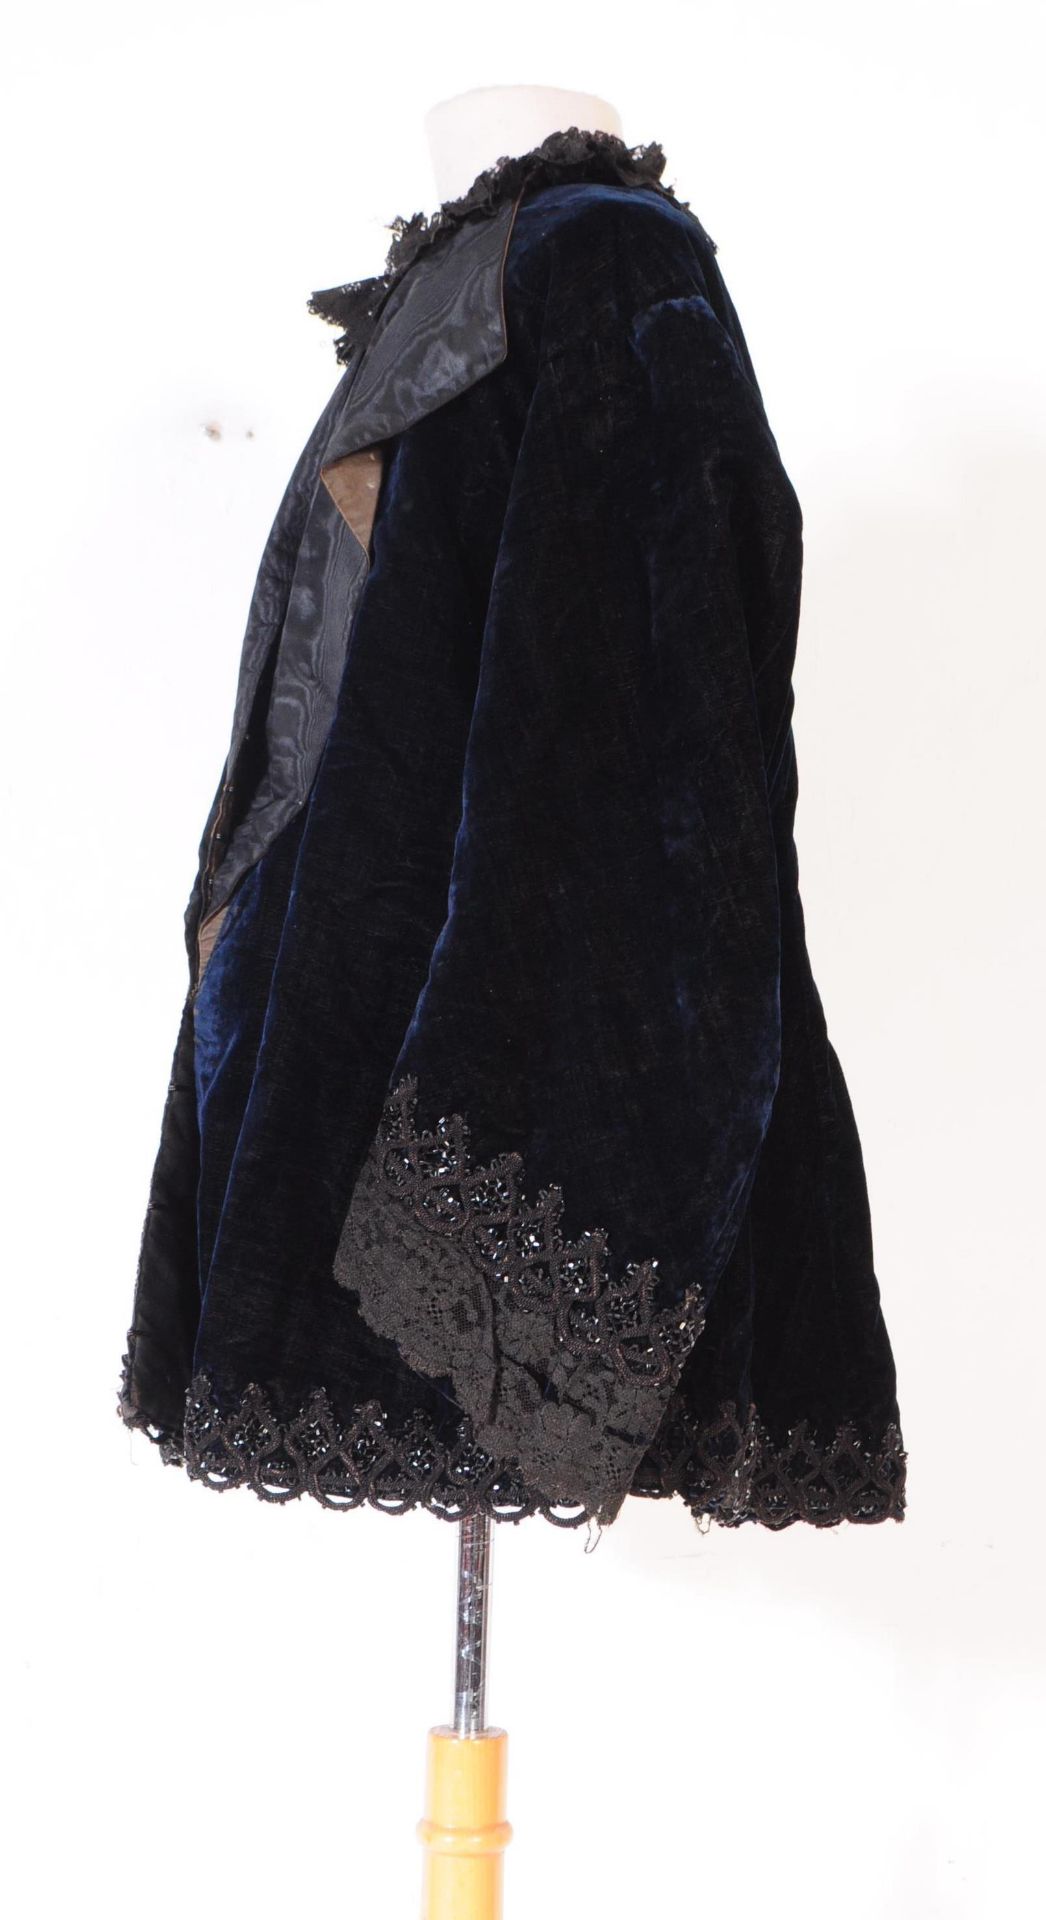 TWO VICTORIAN CLOTHING ITEMS - VELVET CAPE & SHIRT - Image 5 of 12